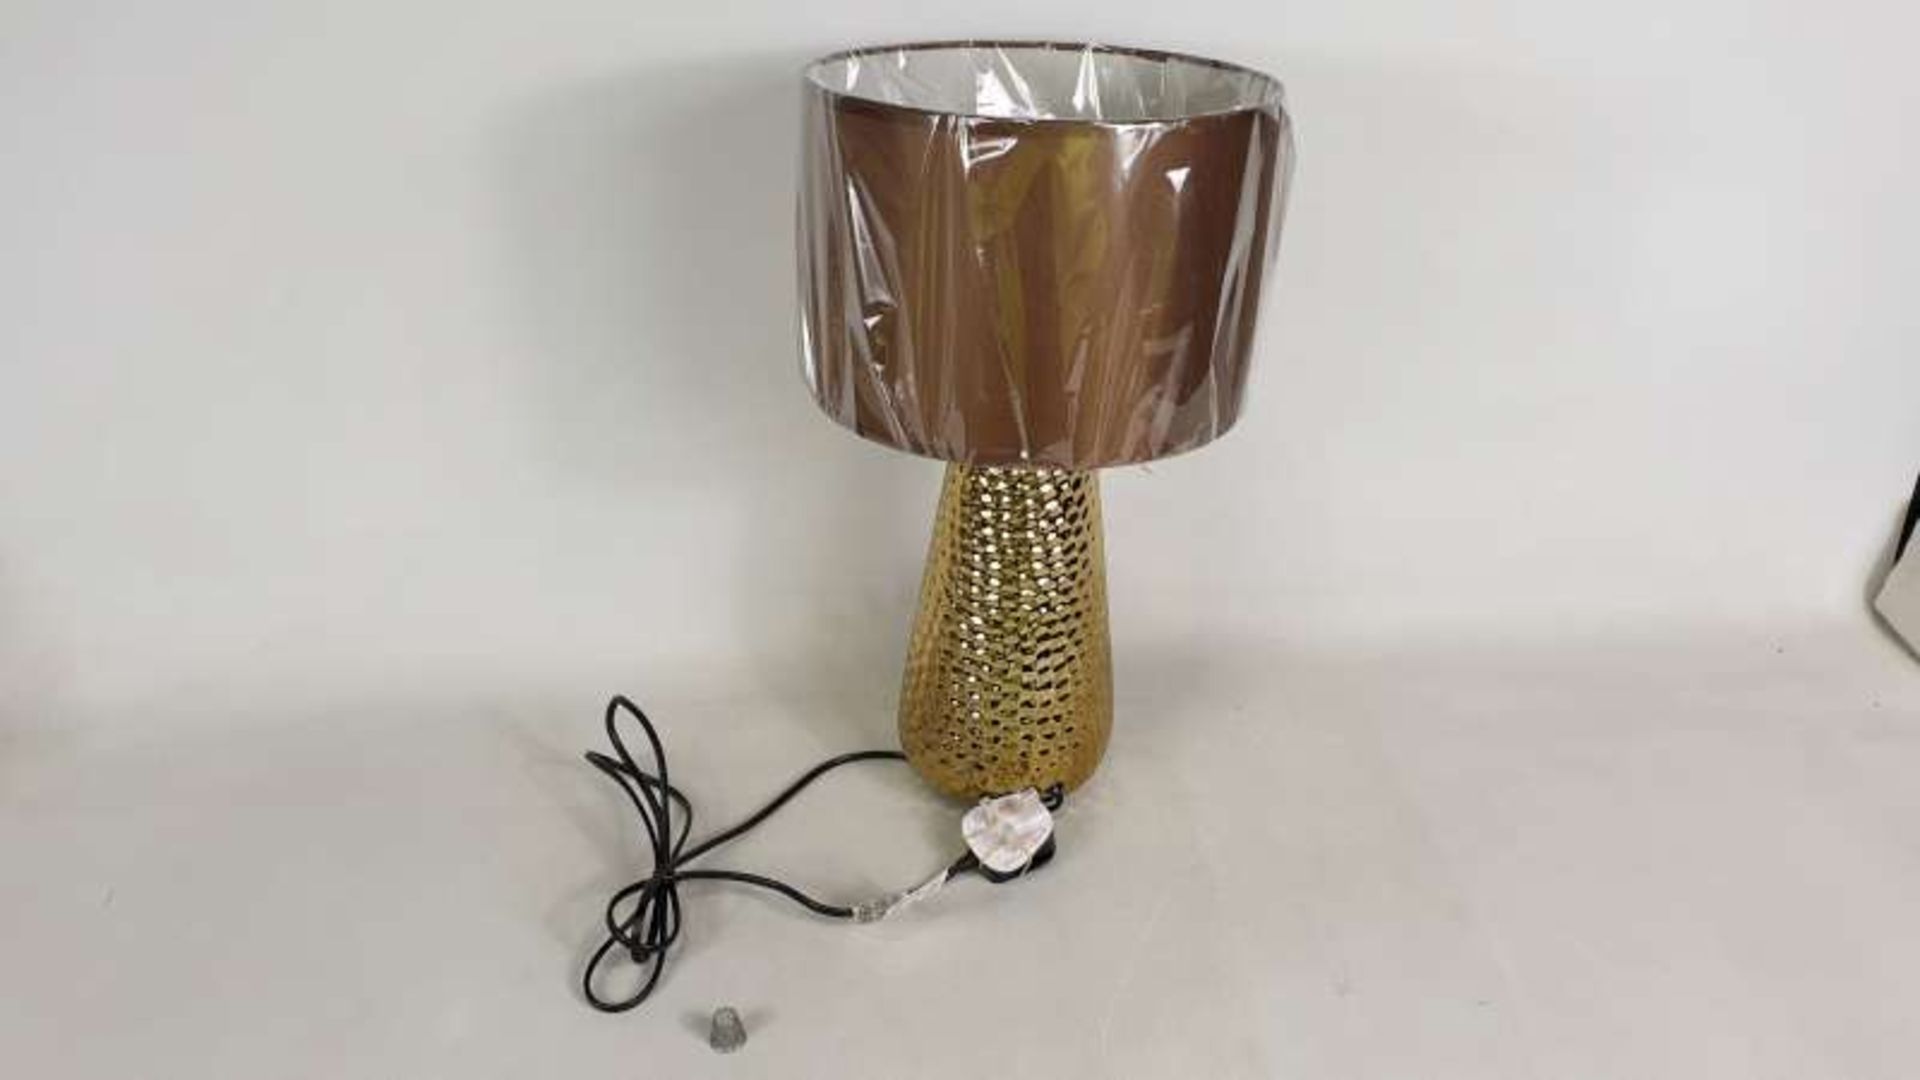 10 X BRAND NEW BOXED GABANNA TABLE LAMPS IN 5 BOXES